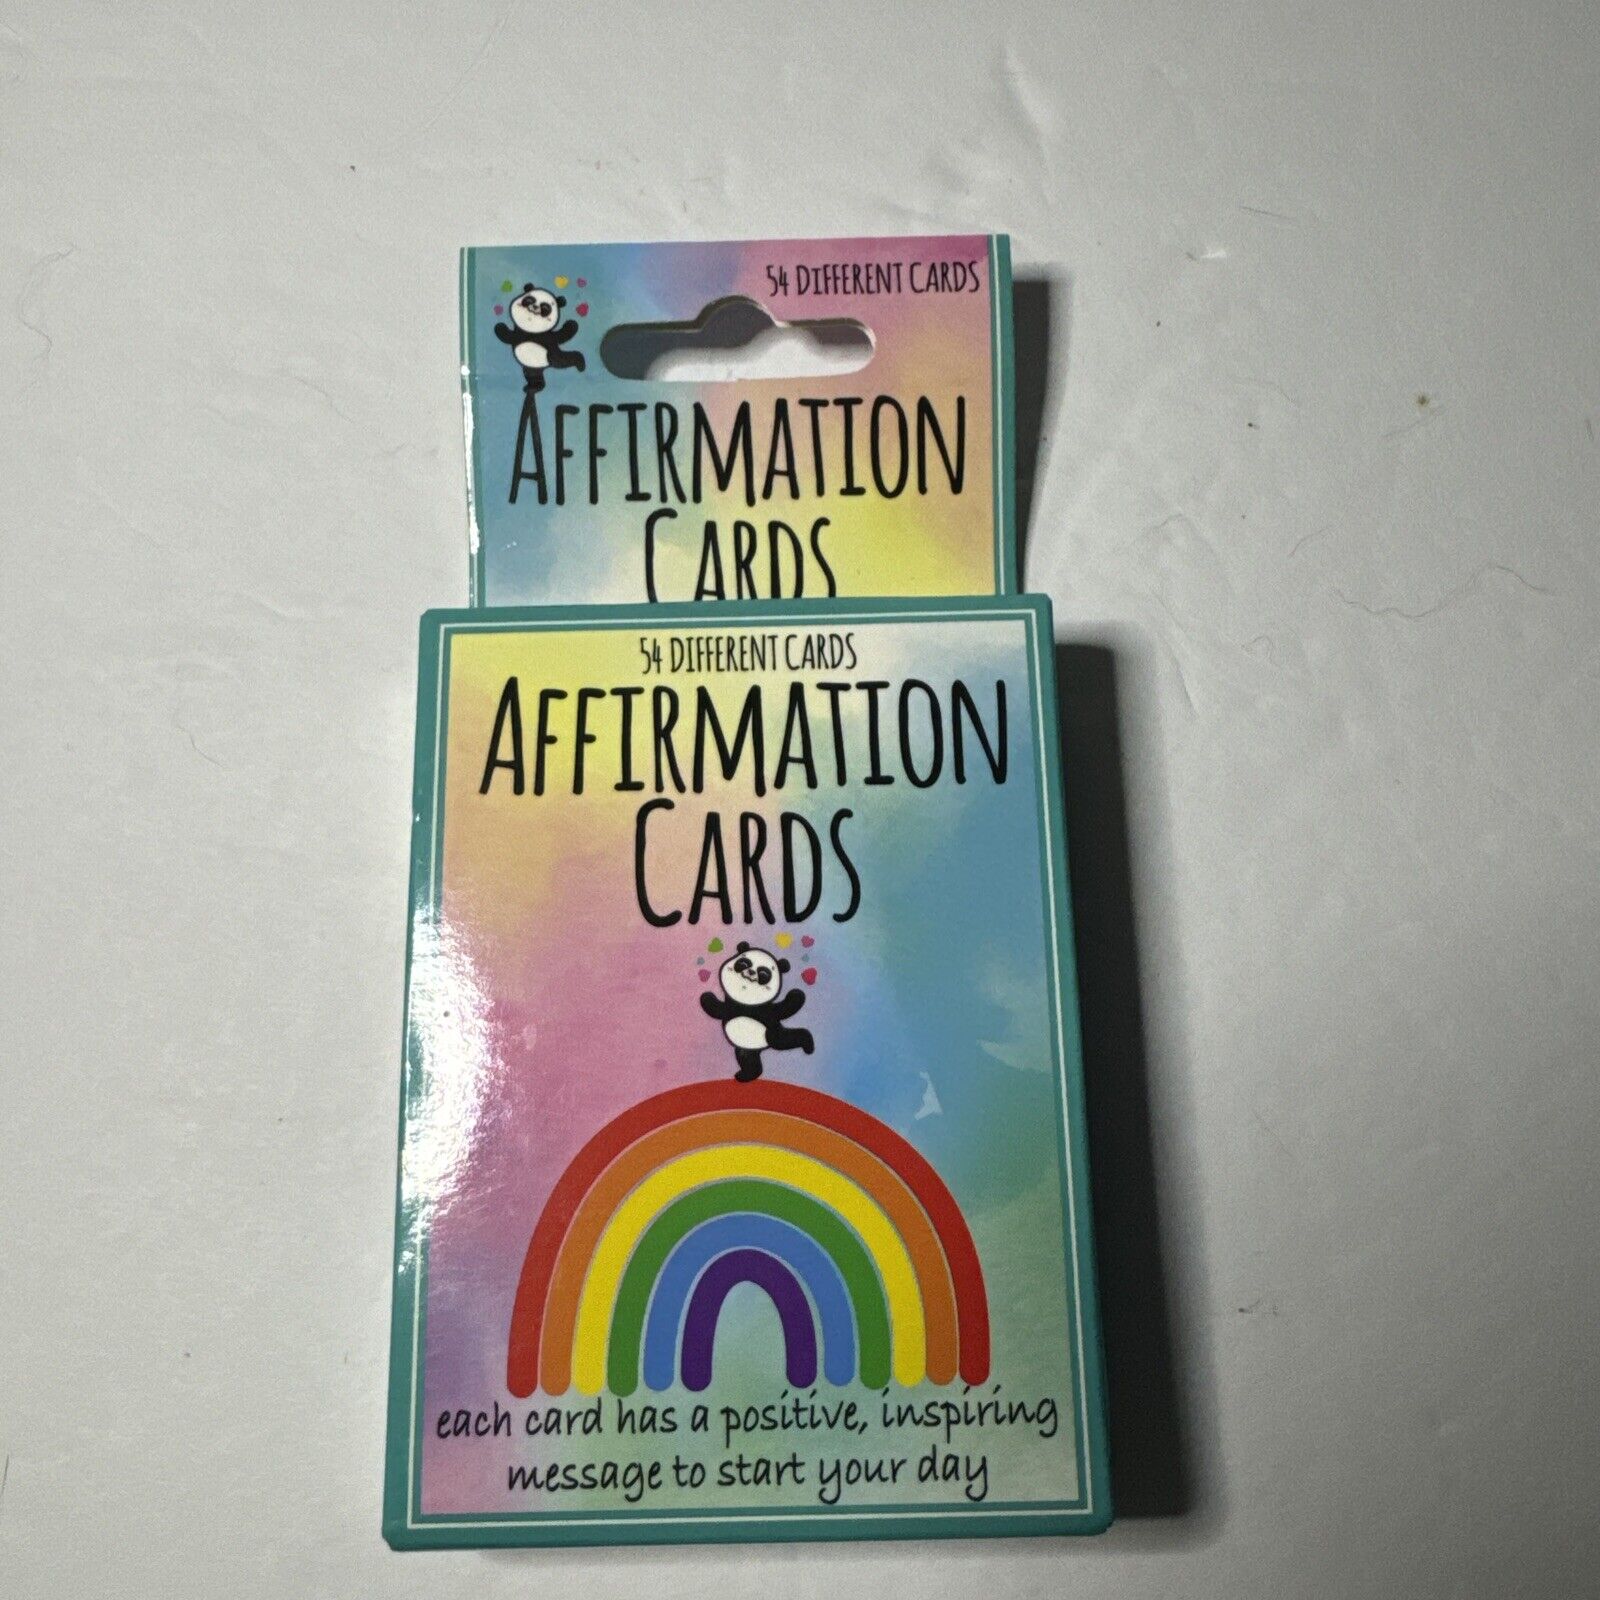 Affirmation Cards - 54 Positive Inspiring Messages - Start Your Day a Better Way